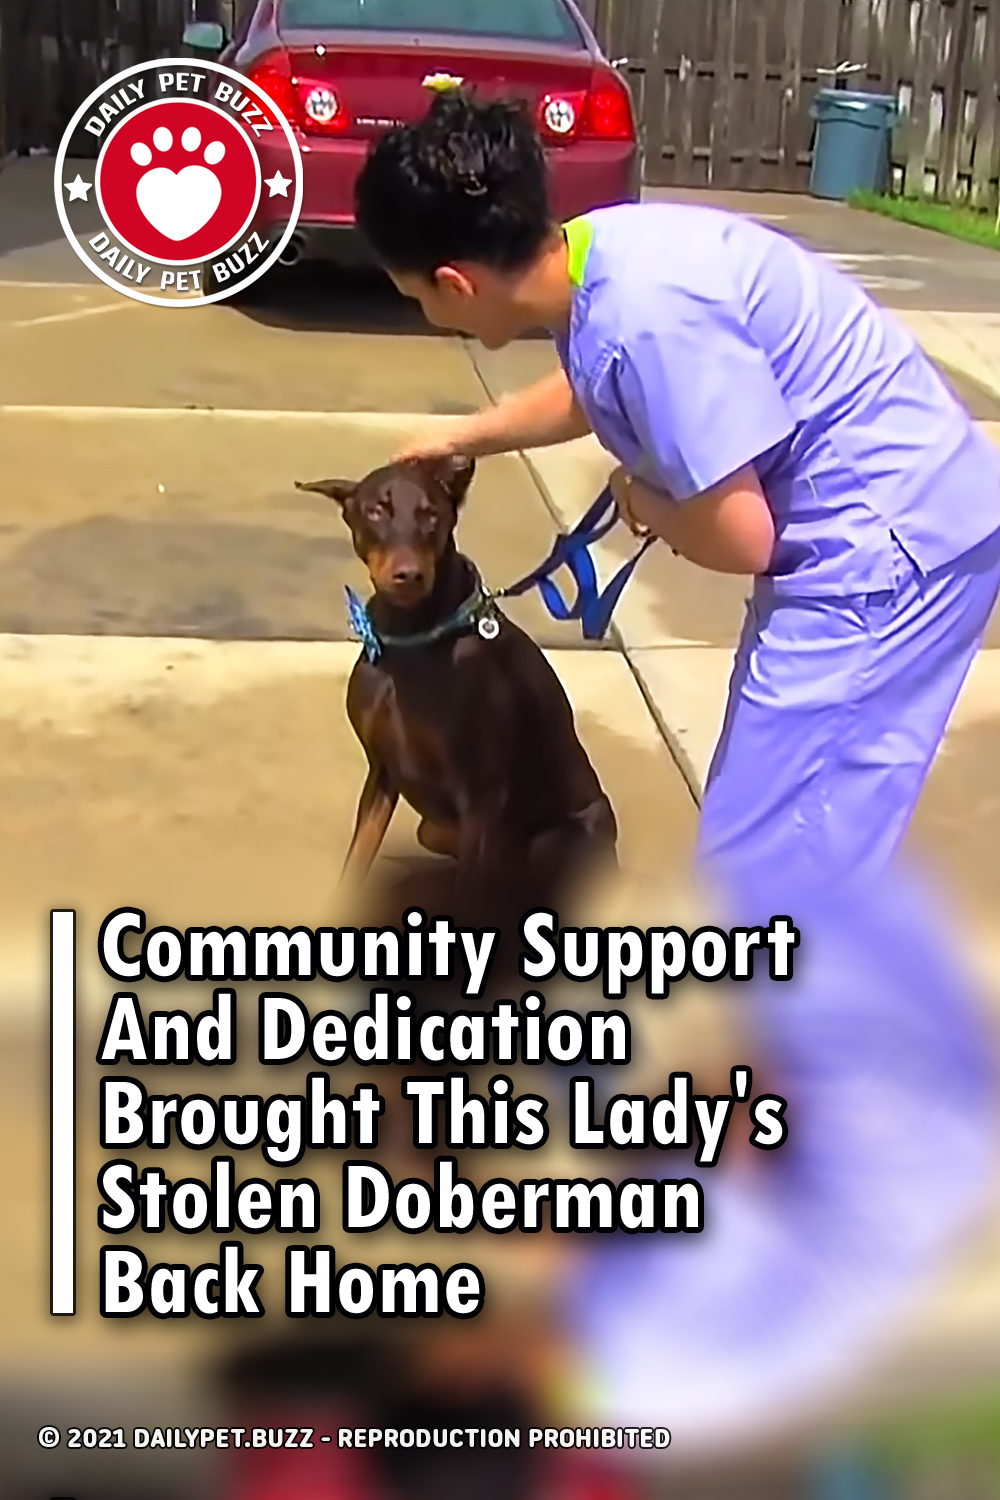 Community Support And Dedication Brought This Lady\'s Stolen Doberman Back Home